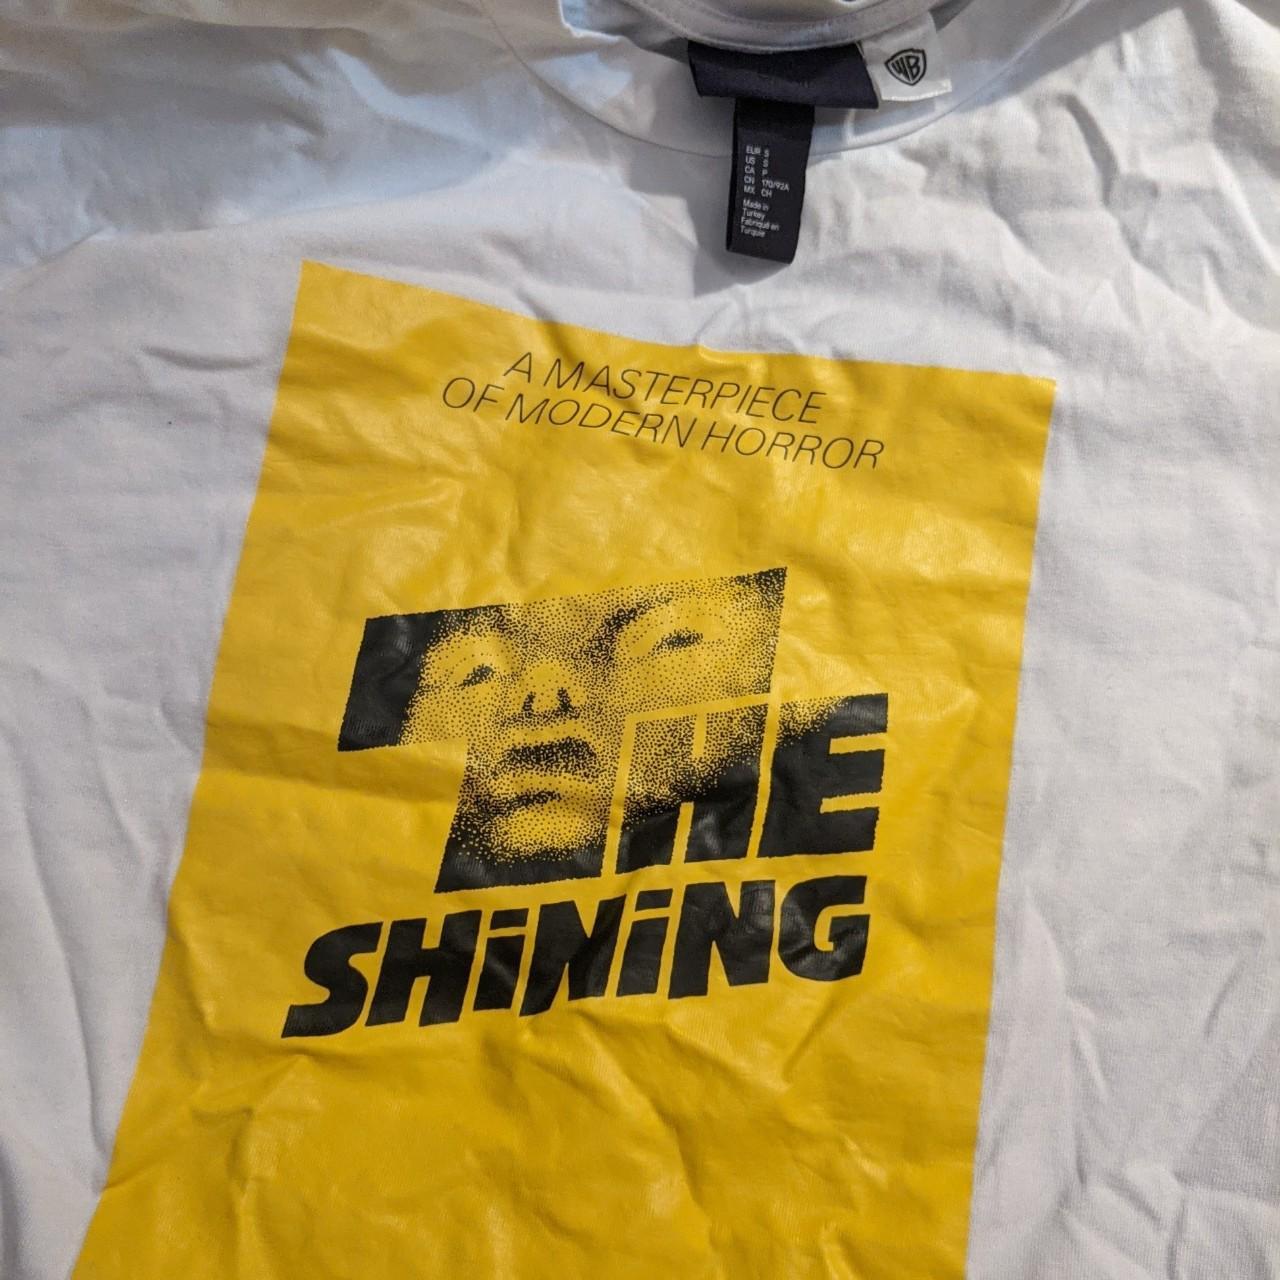 The Shining Jack Torrance book cover tee from H&M....